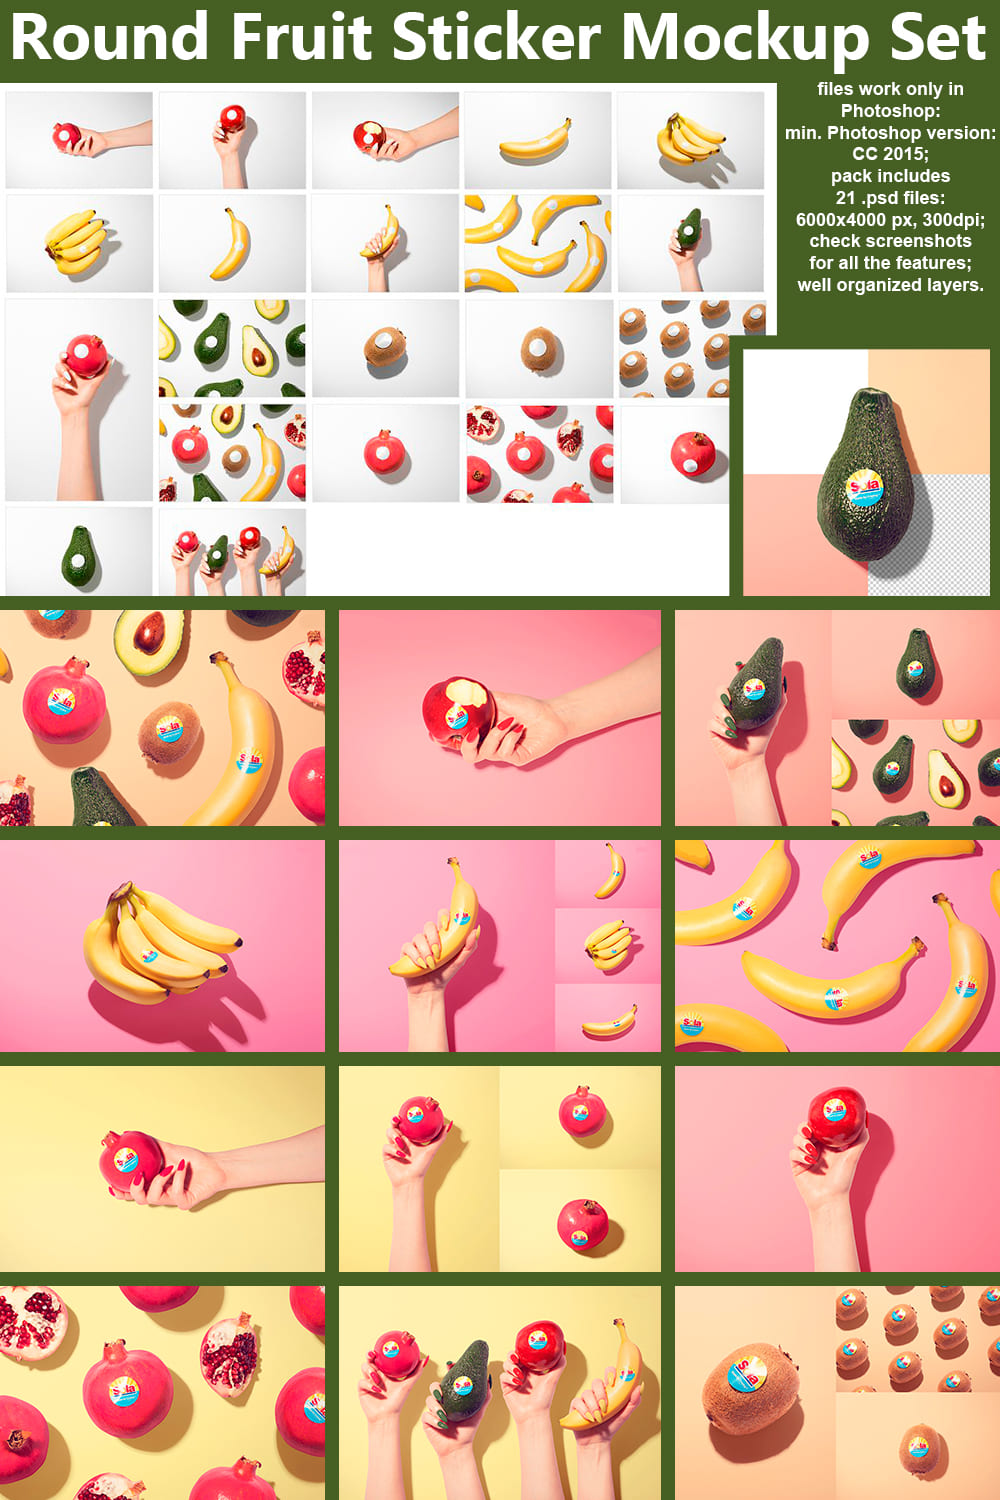 A set of fruit images with great round stickers.